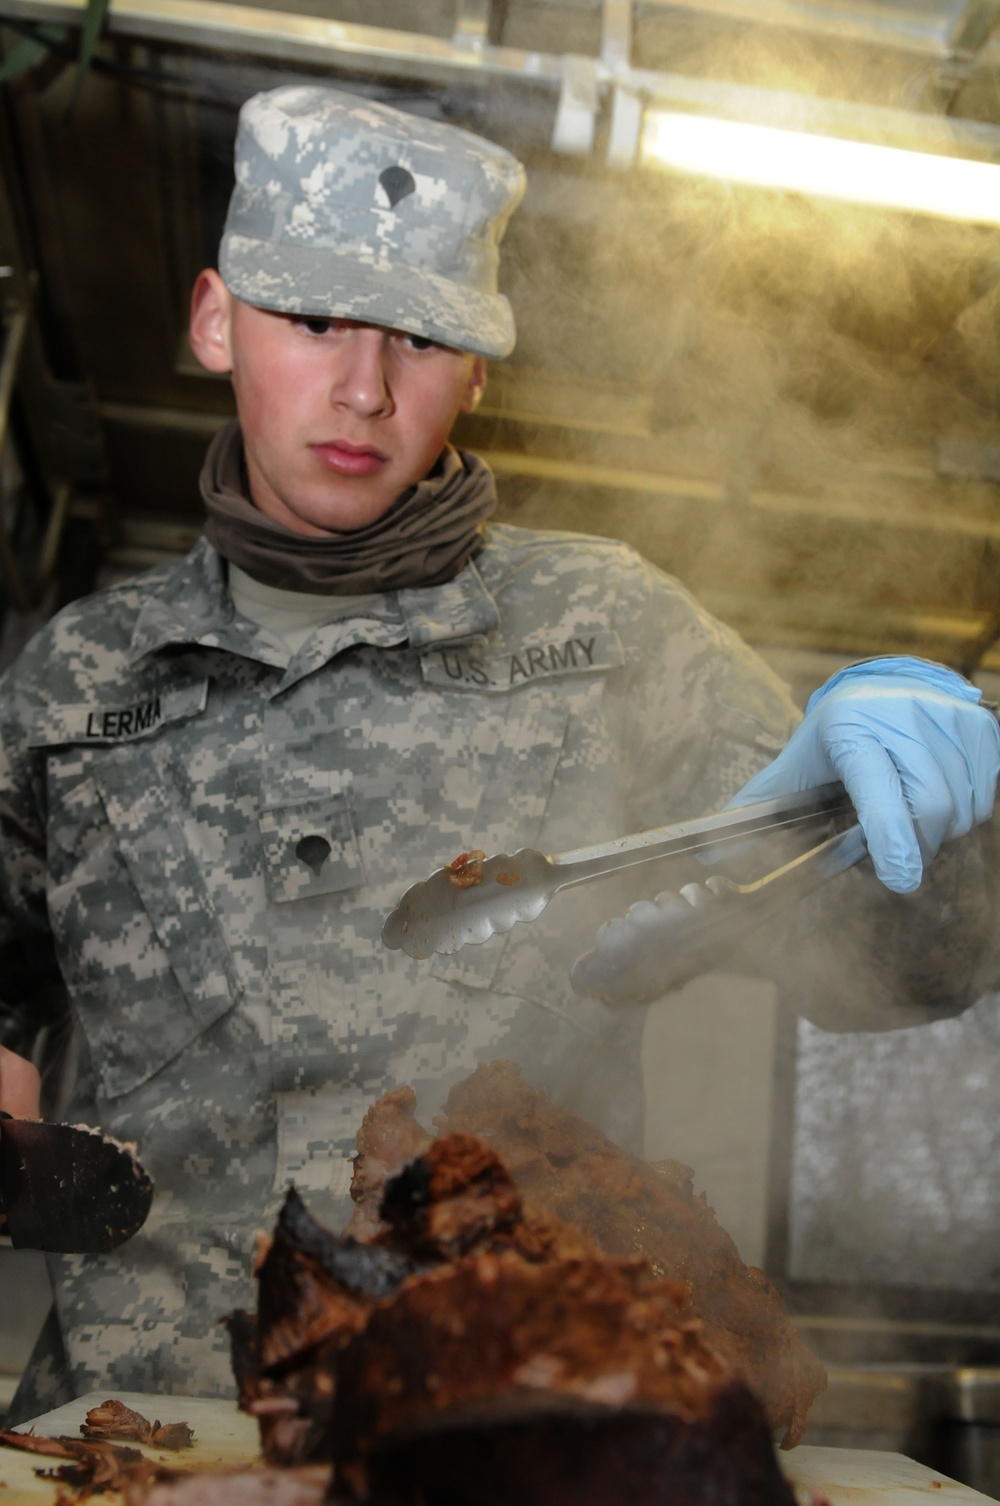 Army Reserve soldiers participate in food service competition